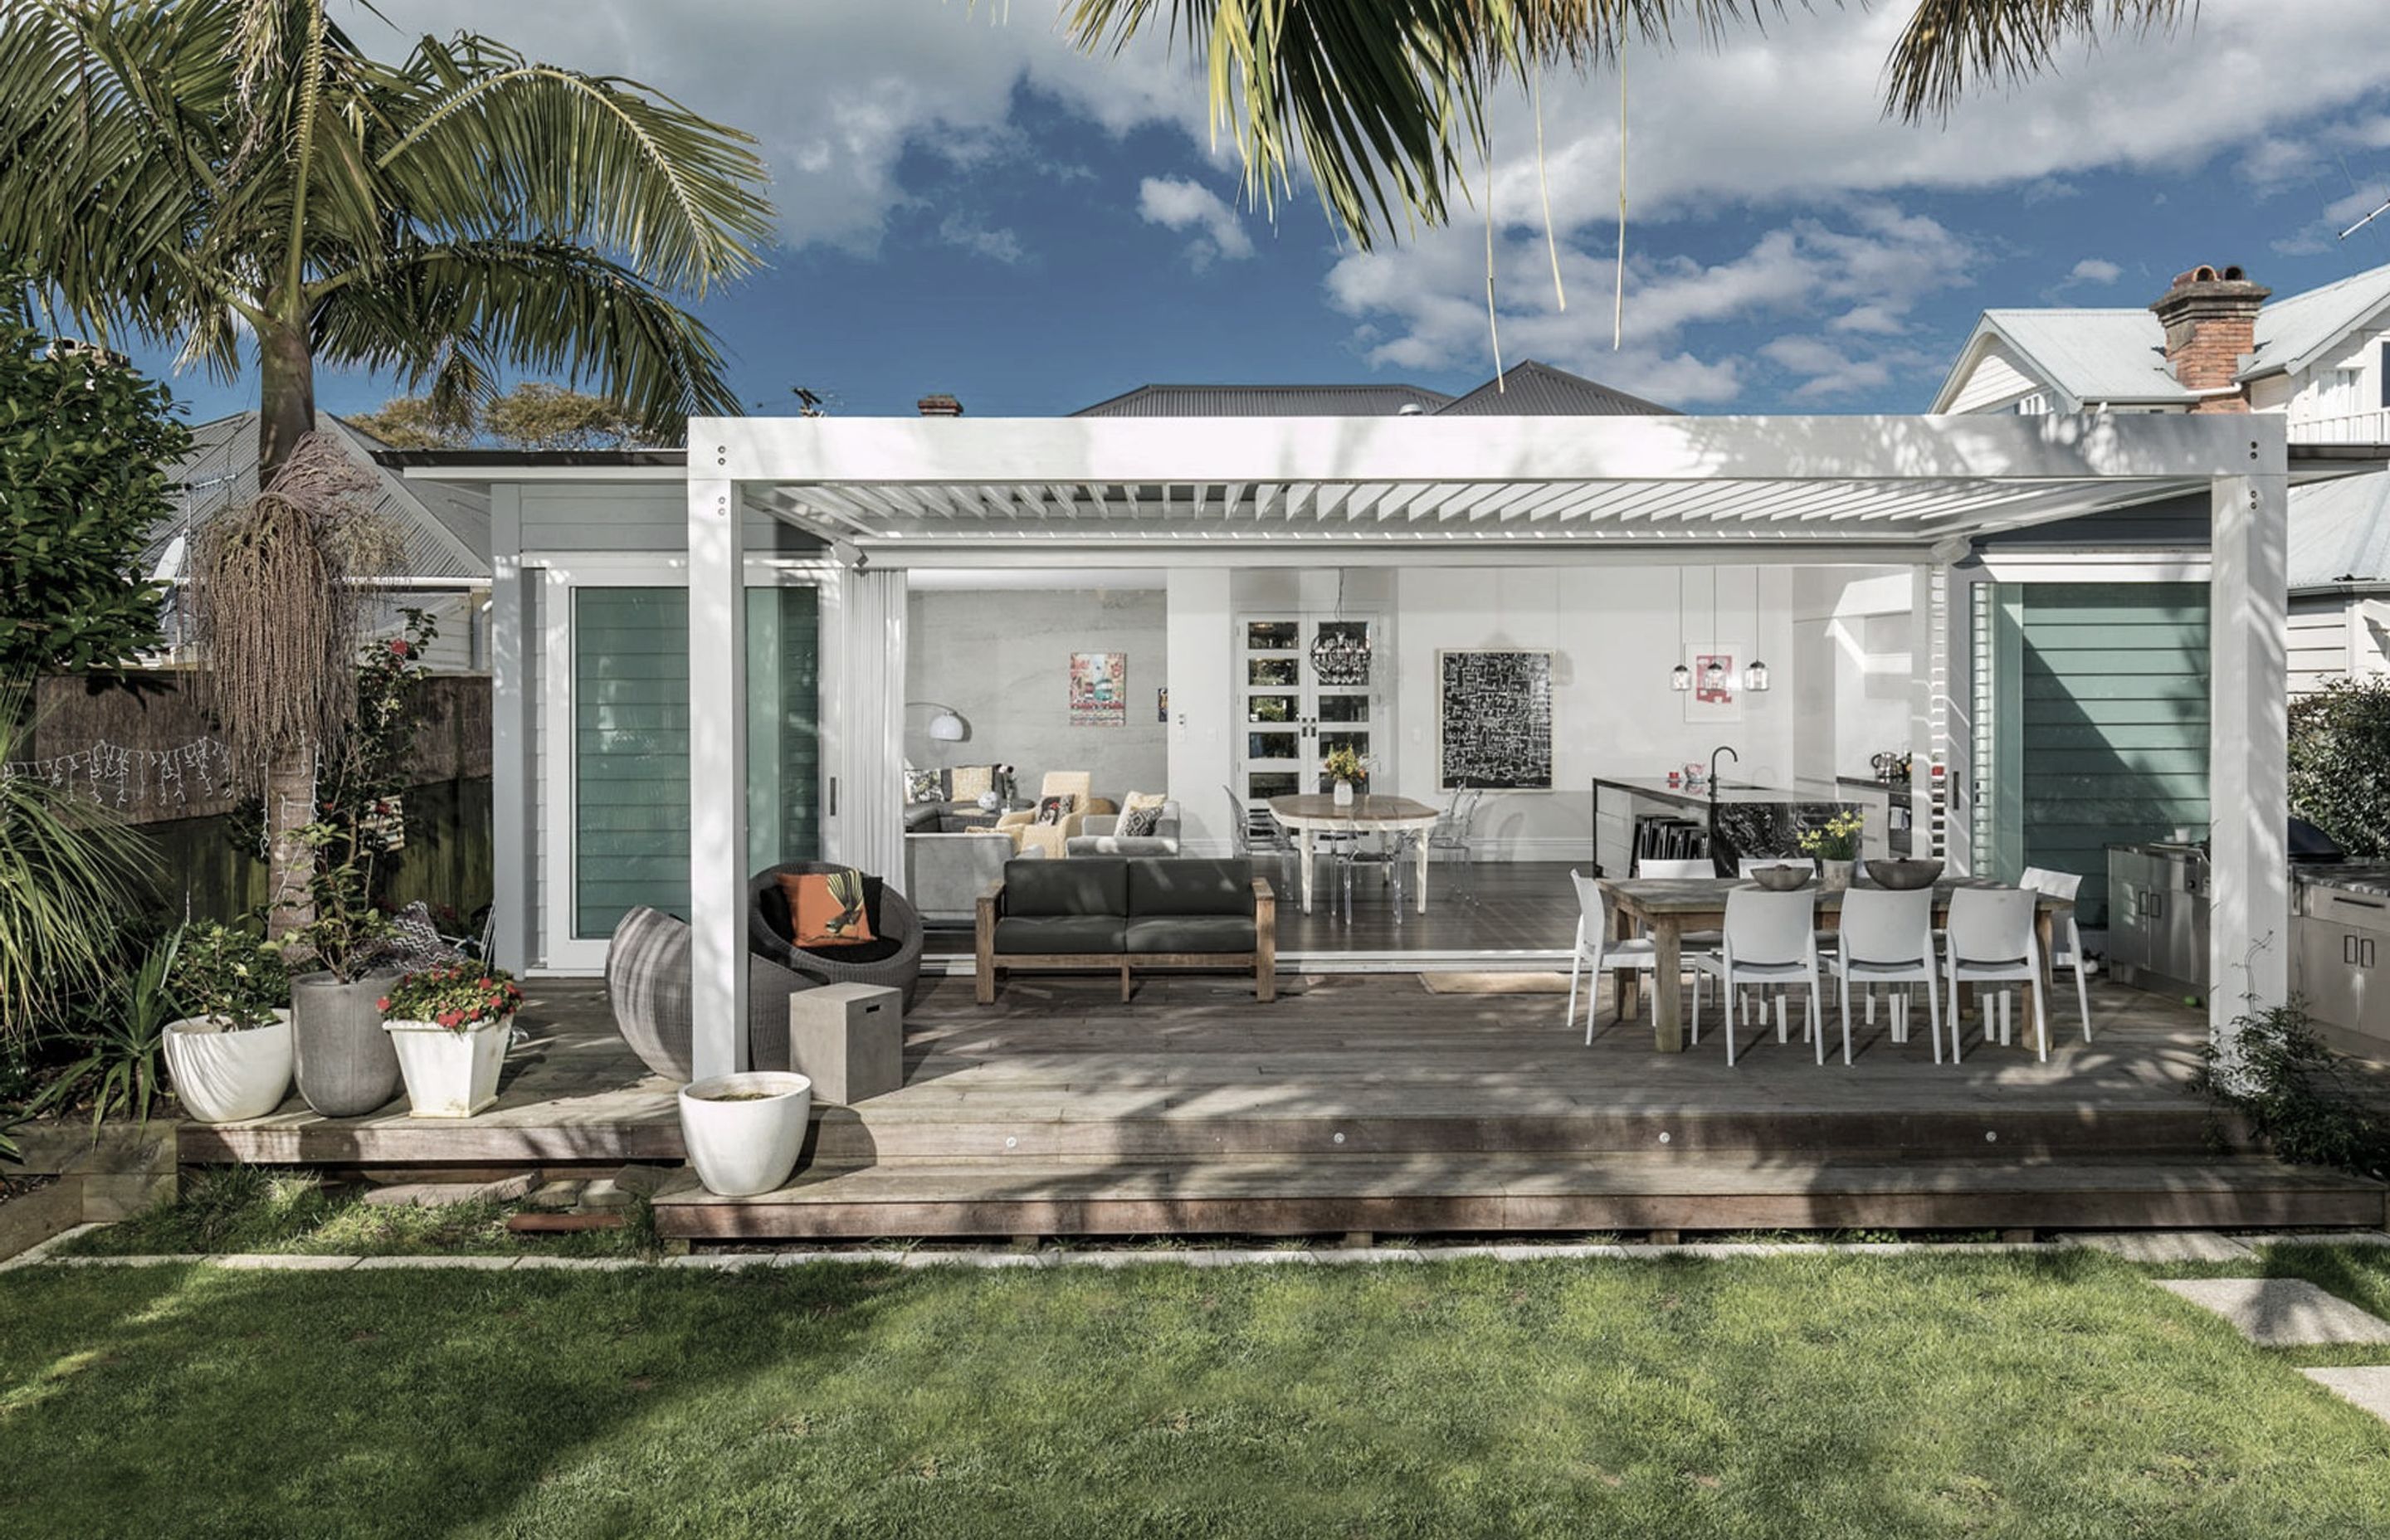 The modern extension on the back of the villa allowed for a connection beteen indoors and out, and a spacious deck for entertaining.